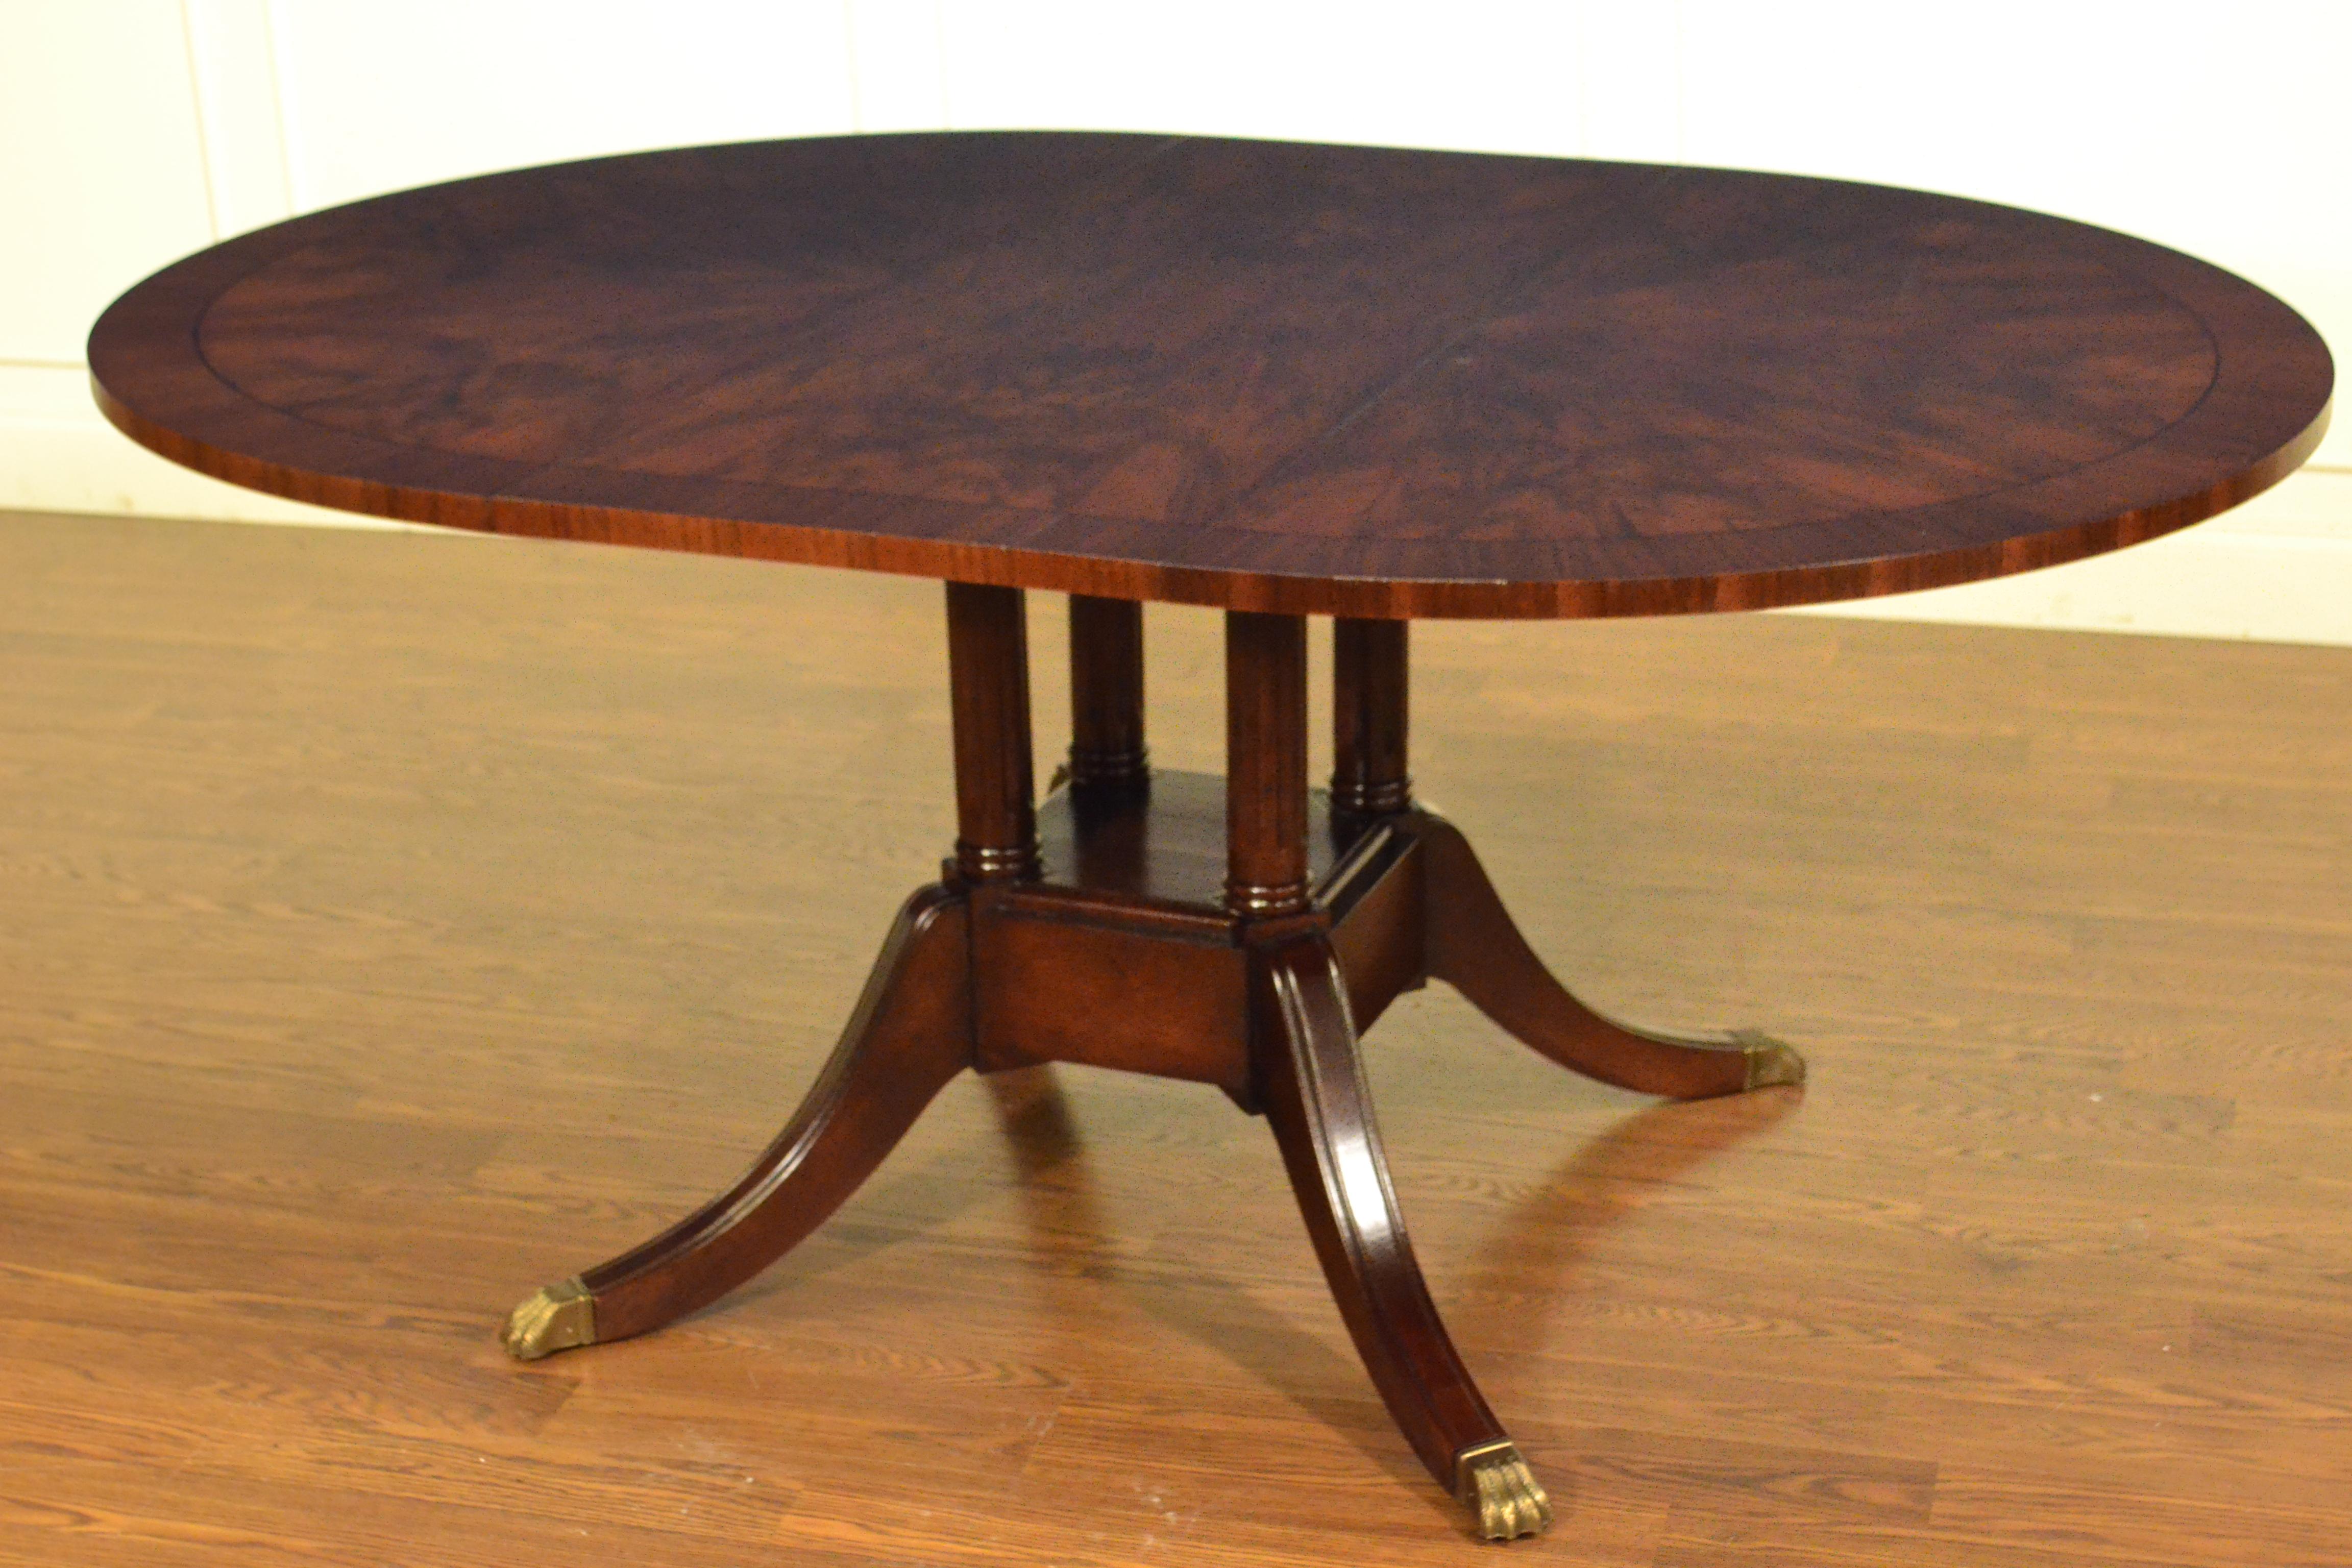 This is made-to-order round traditional walnut dining table made in the Leighton Hall shop. It features field of radial cut cathedral walnut and a border of straight grain walnut. There is an ebony inlay line that separates the field from the